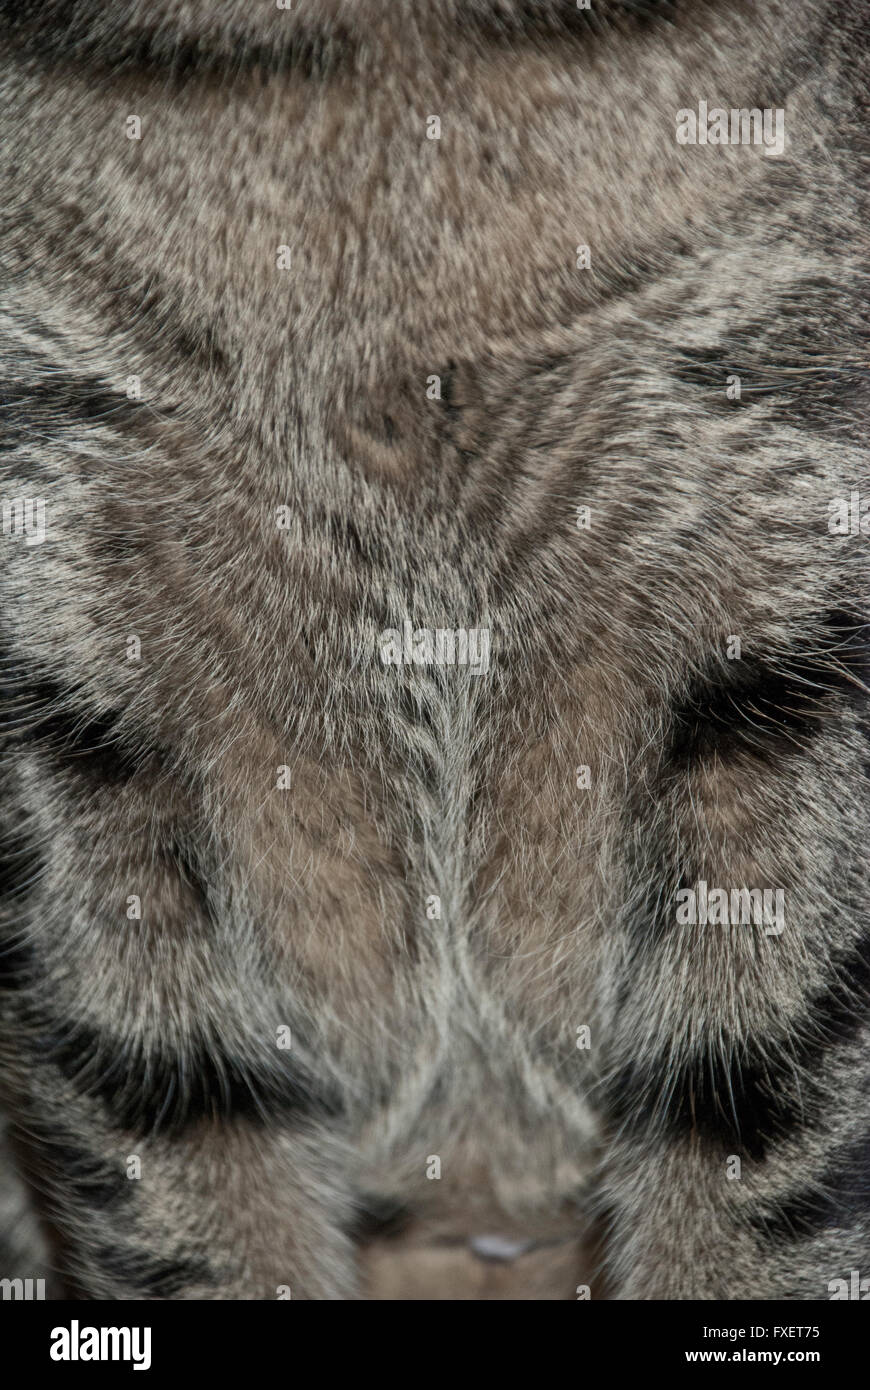 Close Up of Tabby pattern in the fur of a domestic cat Stock Photo